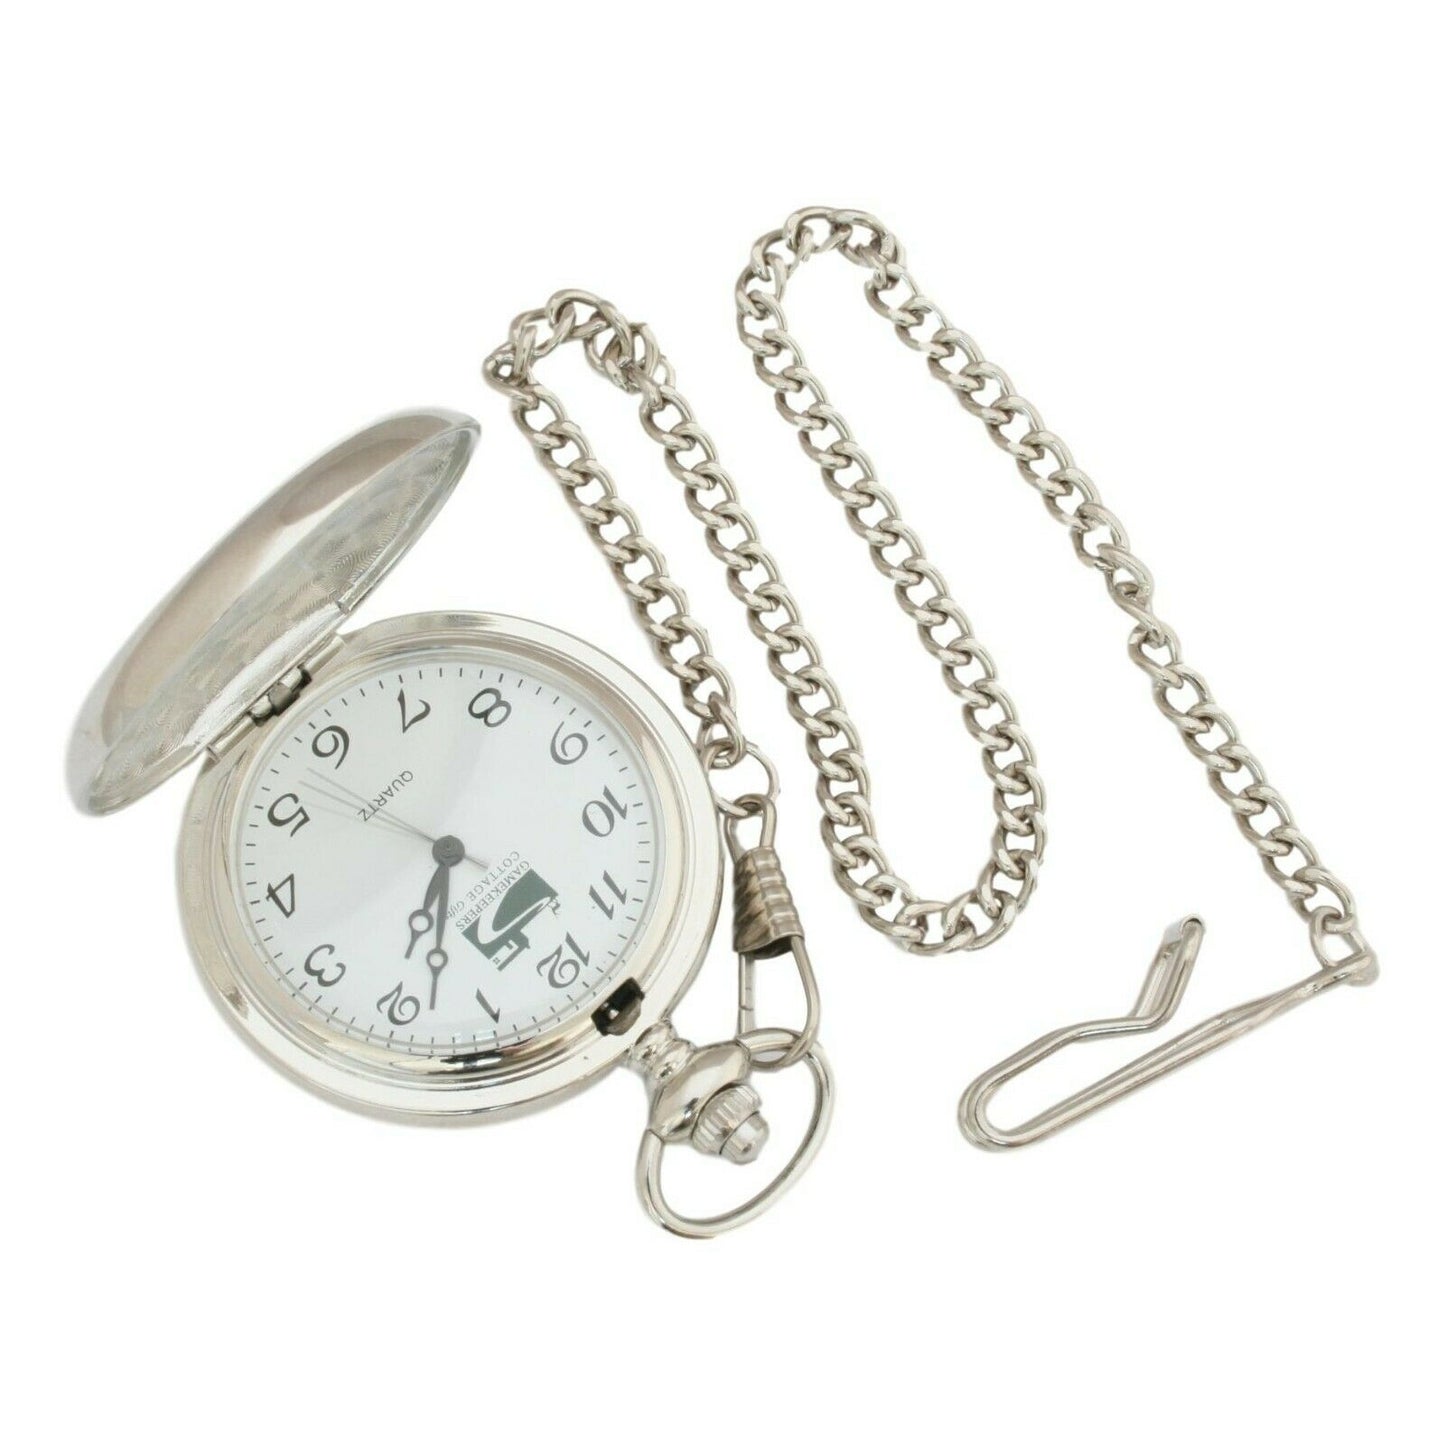 Game Dog Pocket Watches Hand Cast Pewter Fronted In Presentation Box